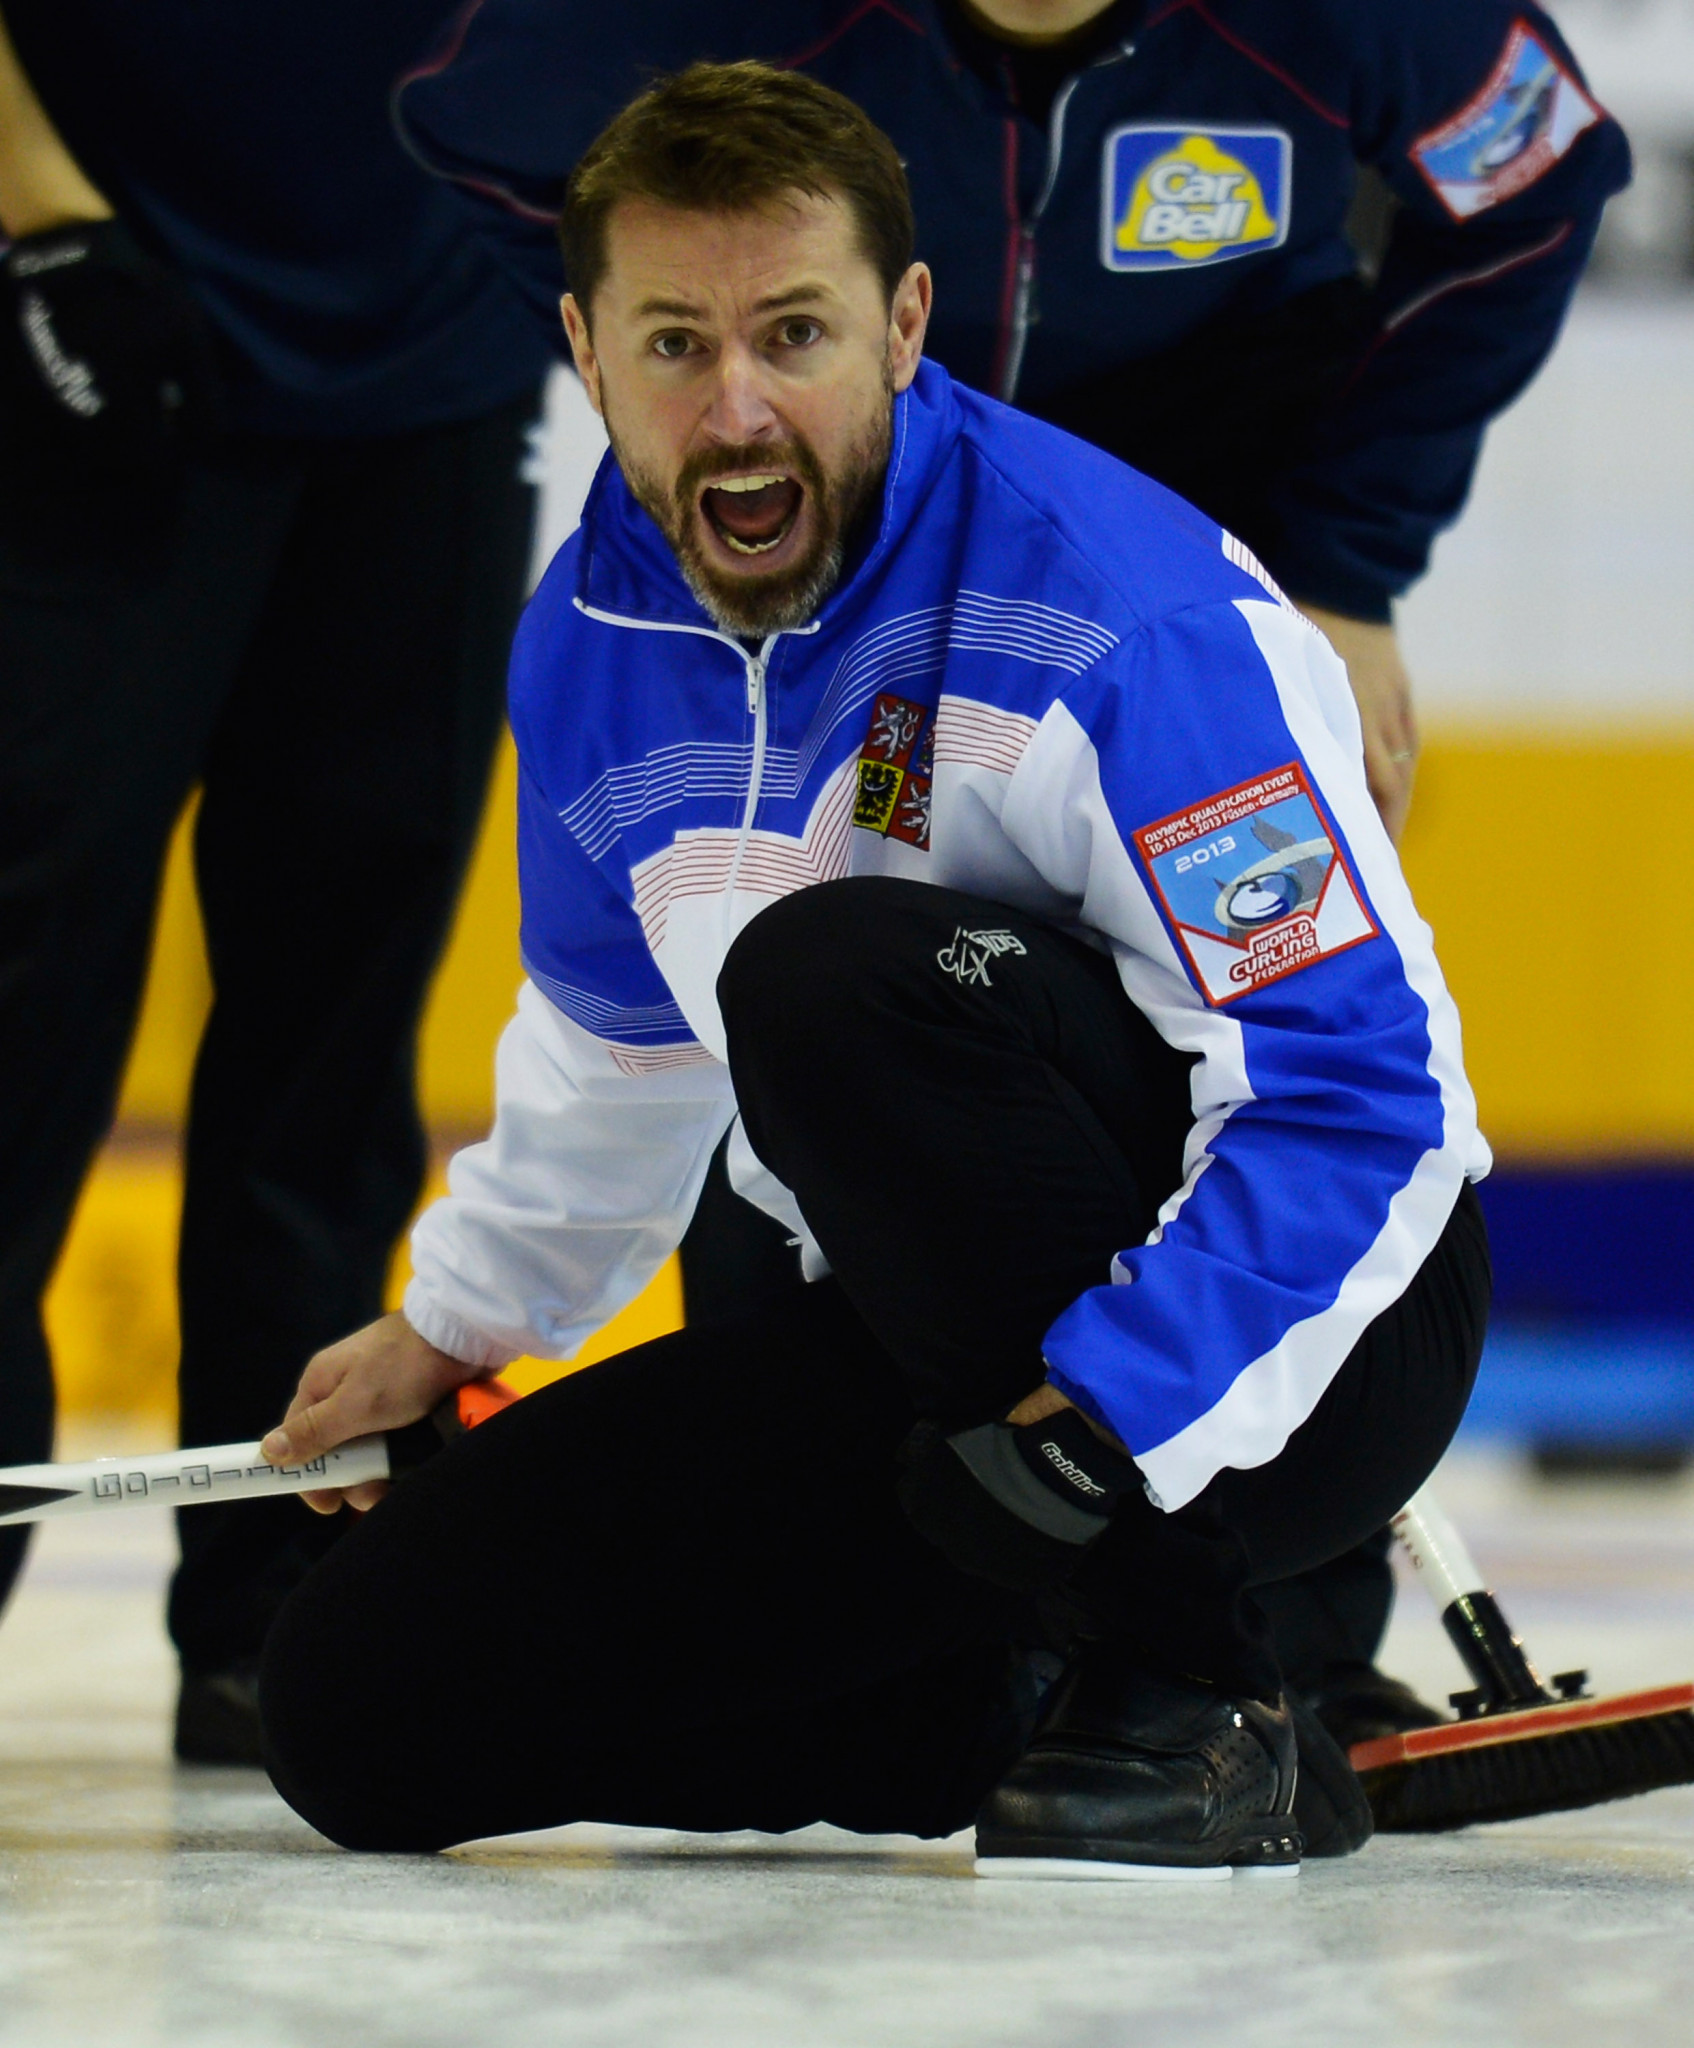 Czech Jiri Snitil believes his experience of professional curling will help him in his new role ©Getty Images